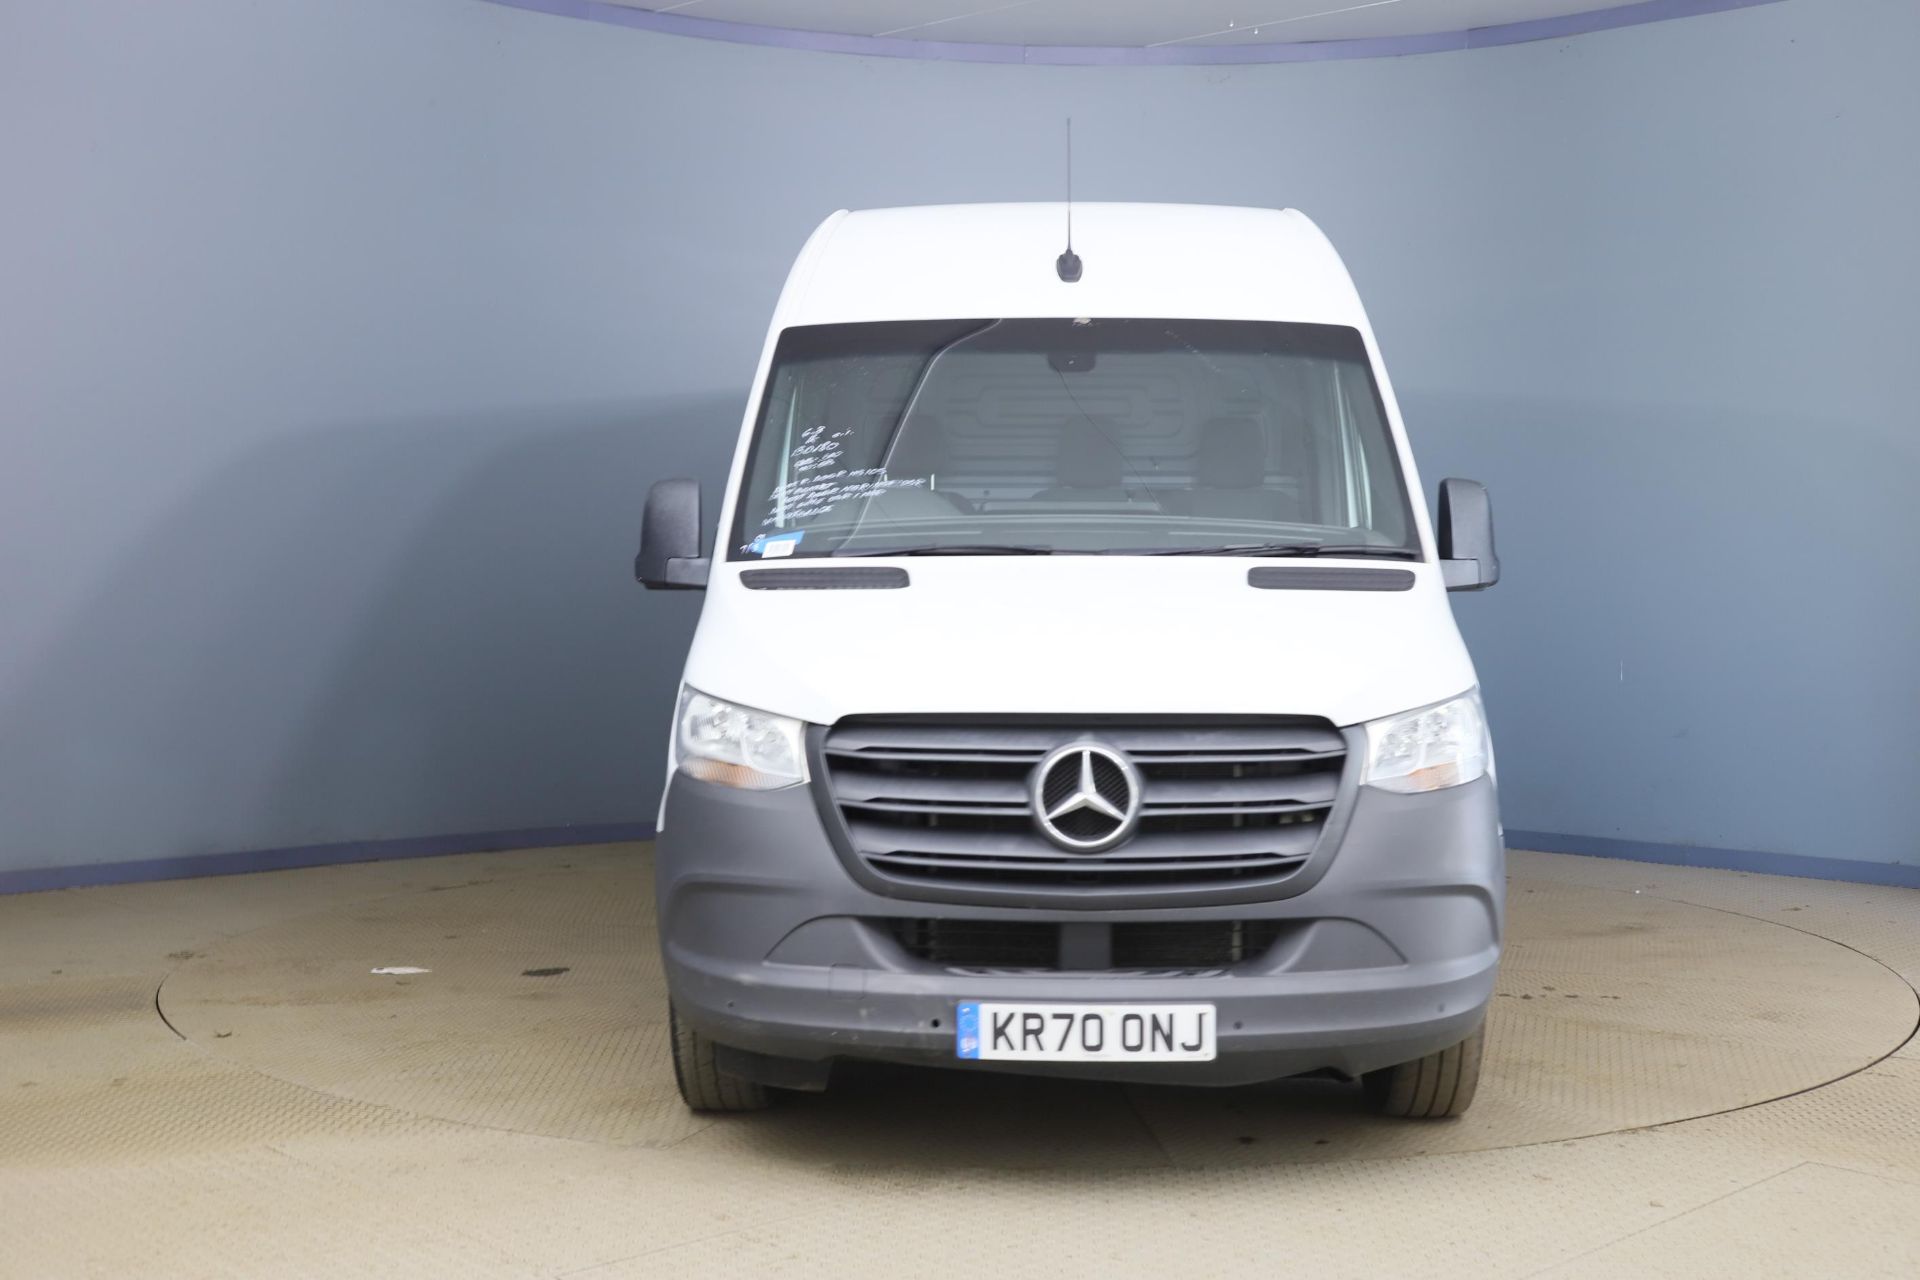 MERCEDES SPRINTER 315CDI "LWB" HIGH TOP "70 REG" 2021 MODEL - 1 Owner From New - Euro 6 - Image 2 of 12